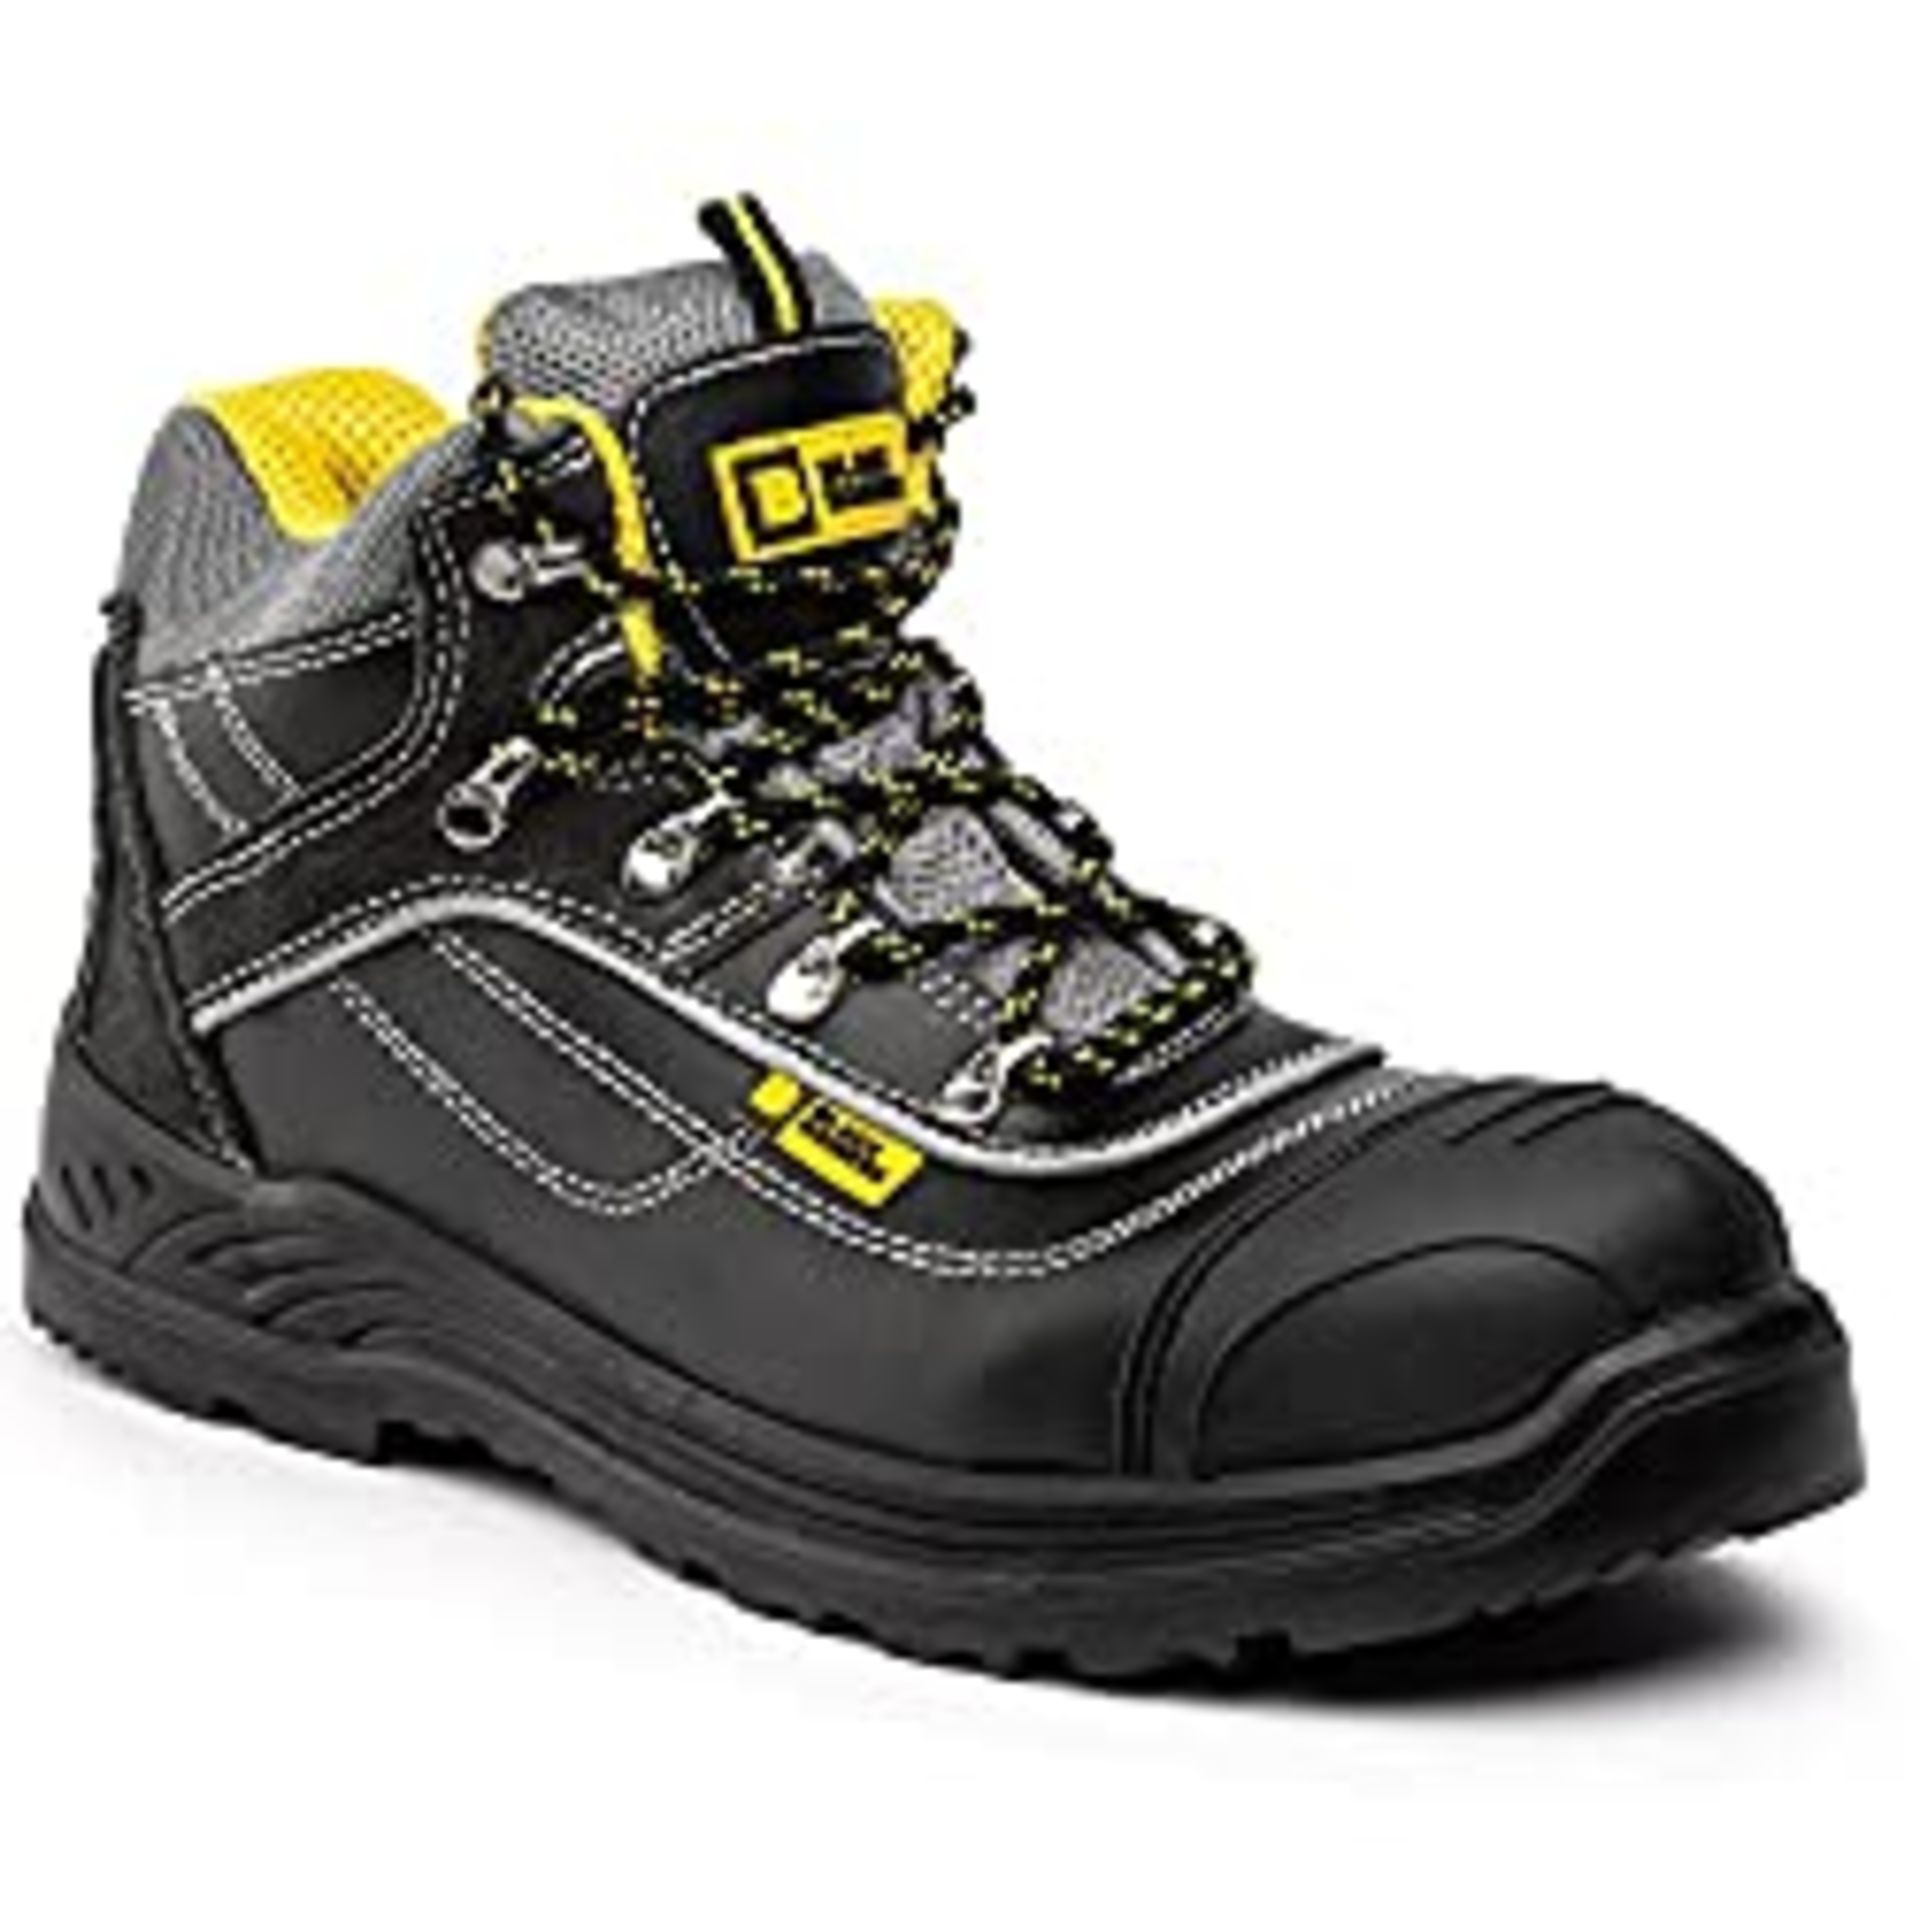 RRP £41.99 Black Hammer Mens Safety Boots Work Waterproof Shoes